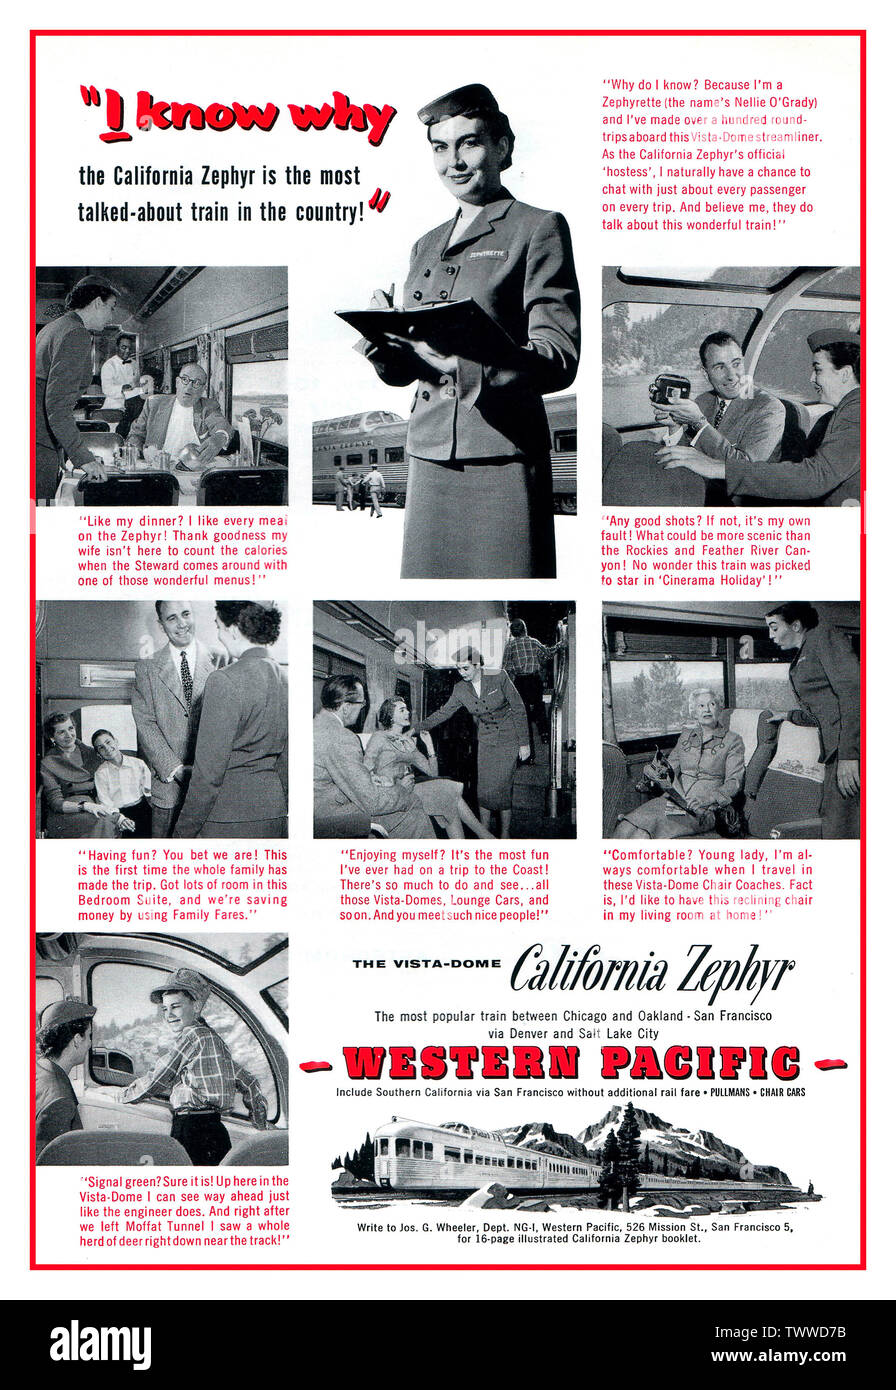 CALIFORNIA ZEPHYR 1950’s Vintage American Rail Train 1956 advertisement for Western Pacific's California Zephyr, featuring a Zephyrette, uniformed rail hostess interacting with a variety of passengers on board the train. February 1956 Advertisement for the Western Pacific's California Zephyr Western Pacific Train Railroad Railway Stock Photo